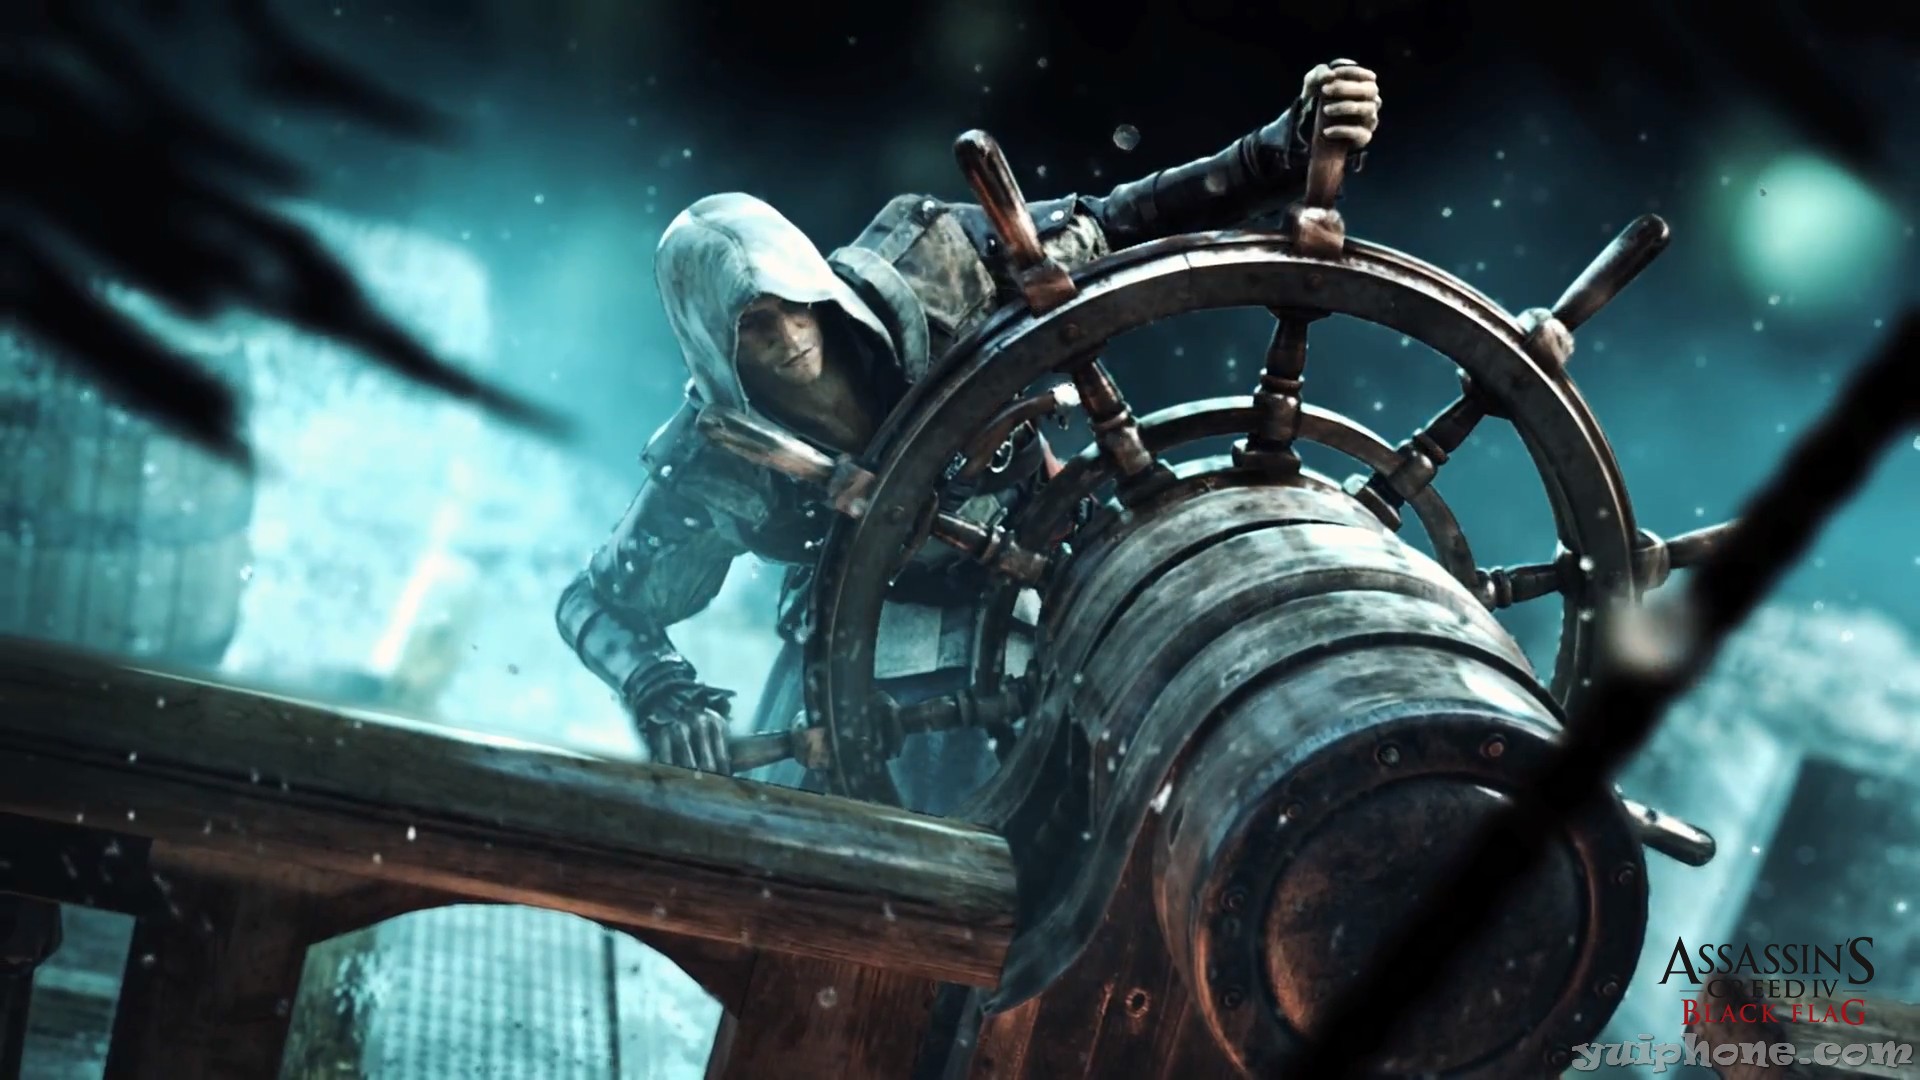 At The Helm Ac4 Assassins Creed Black Flag Wallpaper World Games